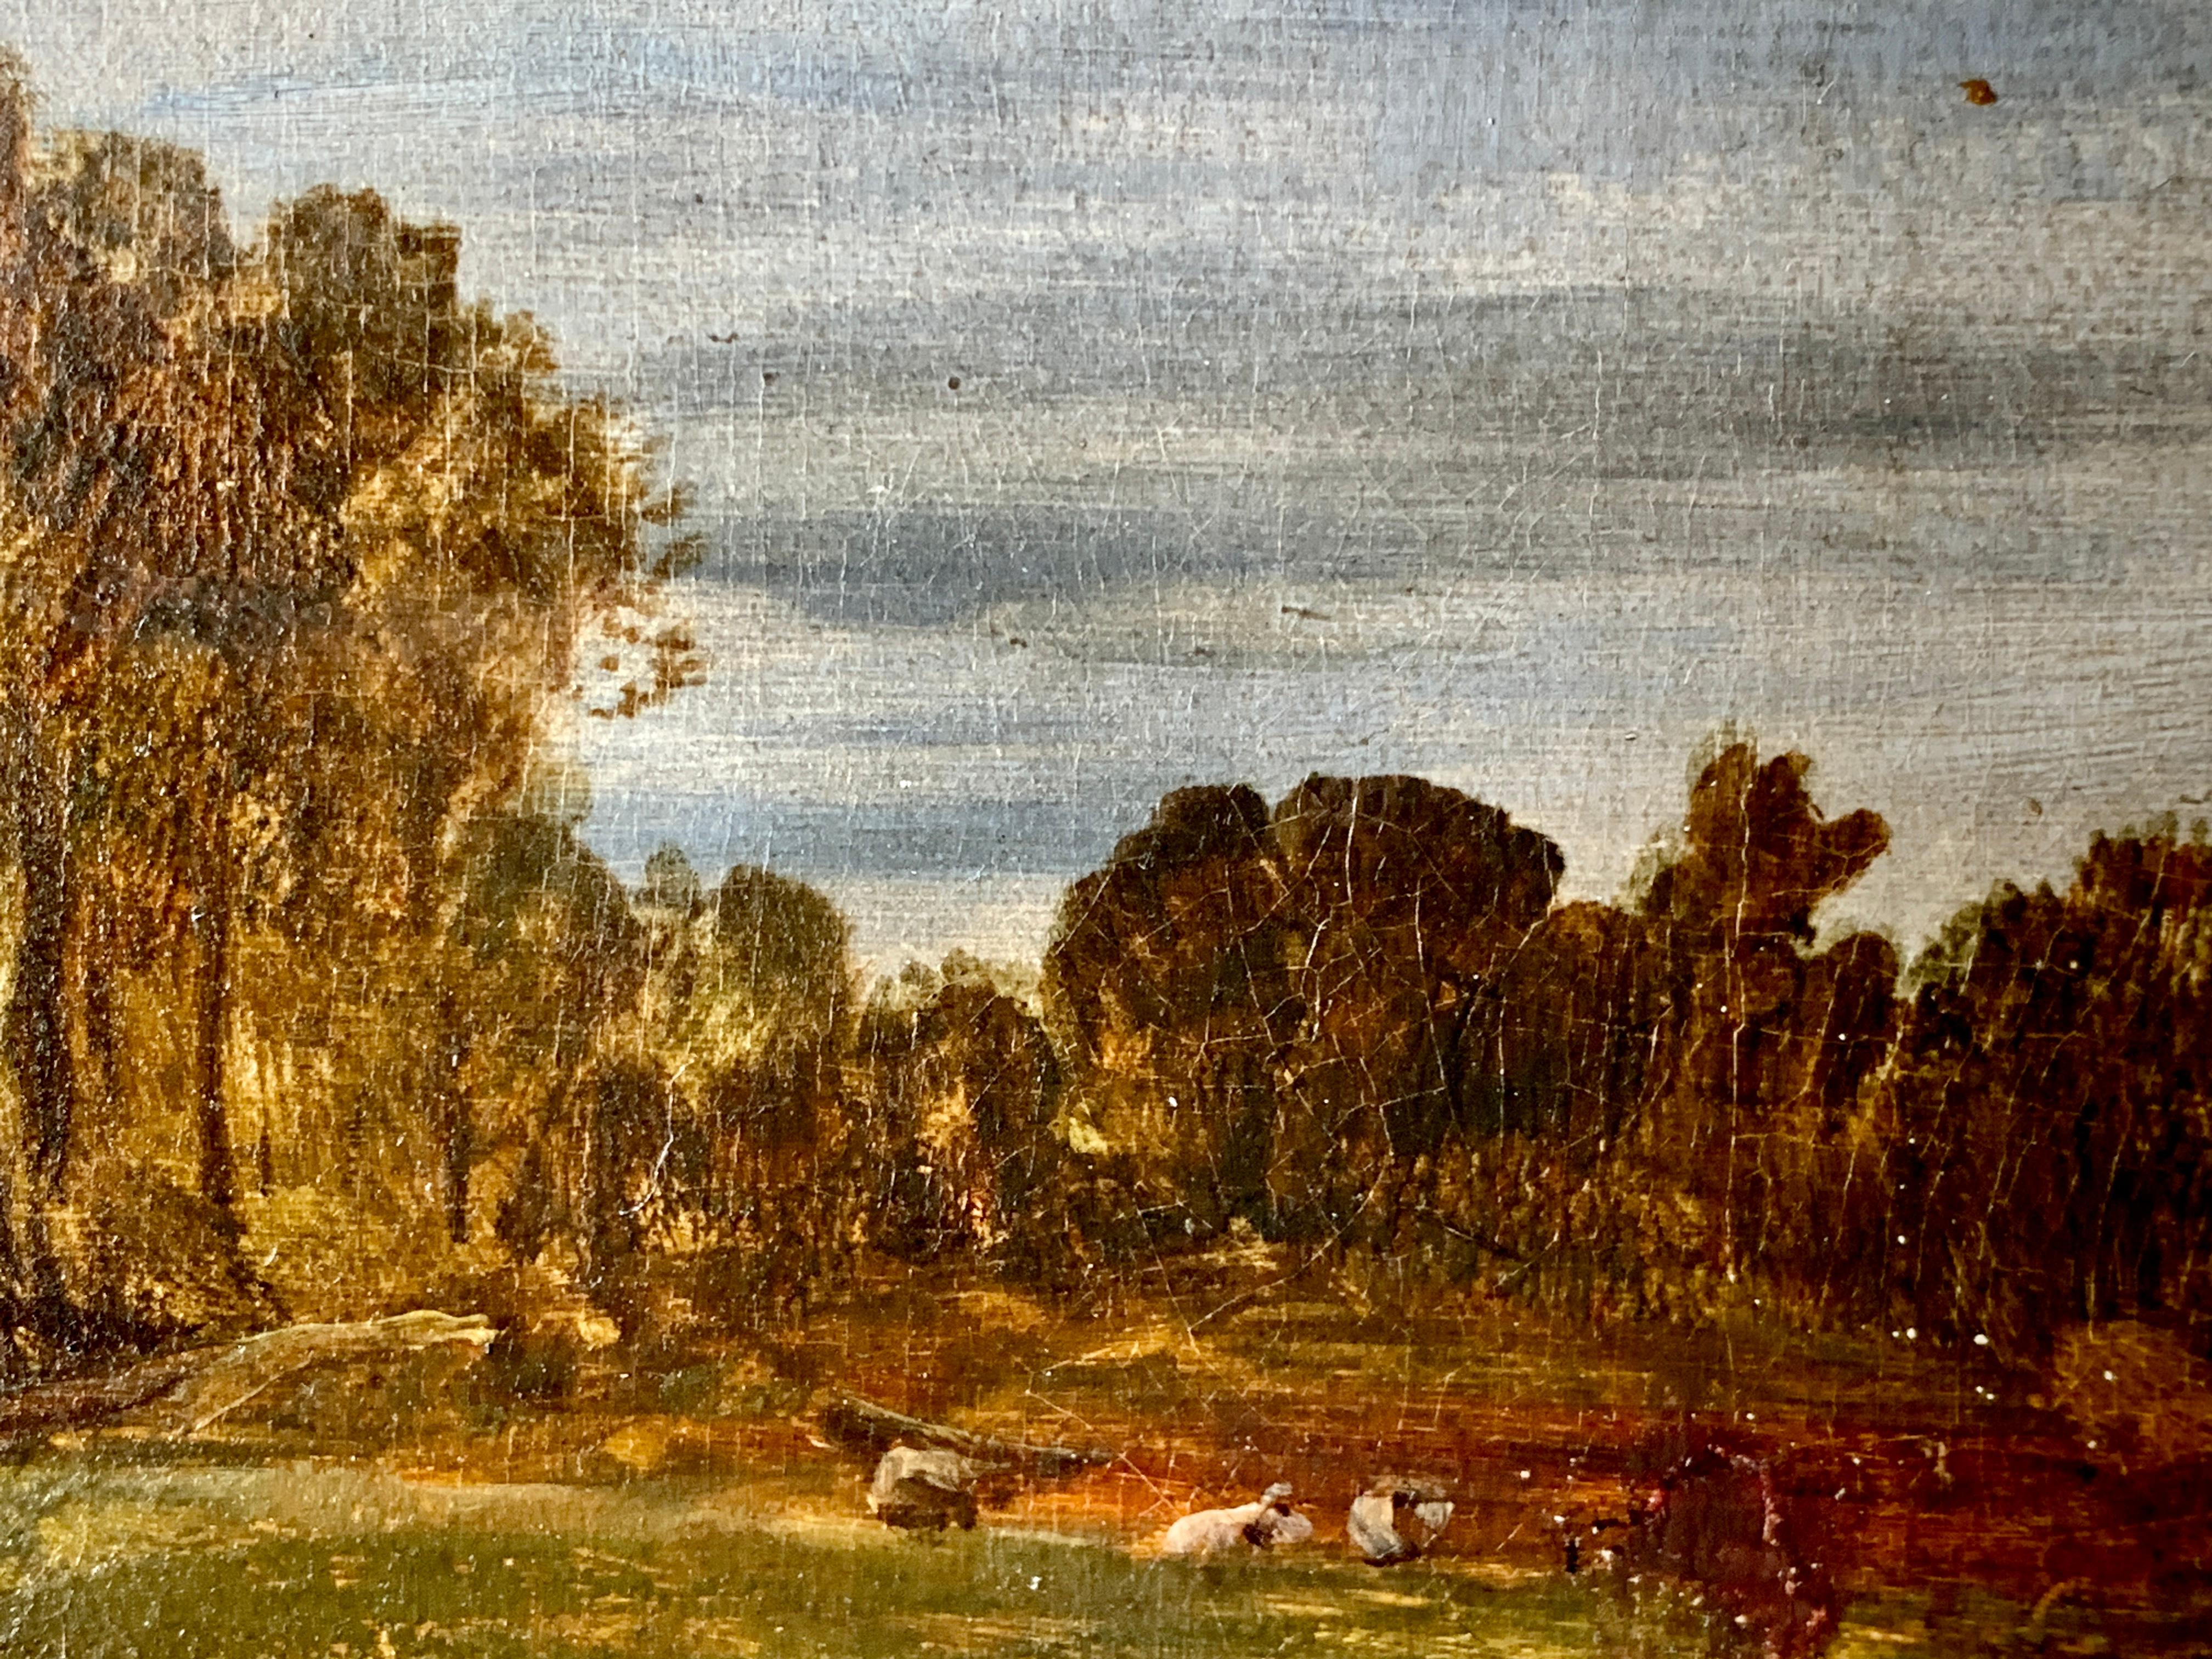 19th century English landscape with a figure on a pathway and stormy sky For Sale 1